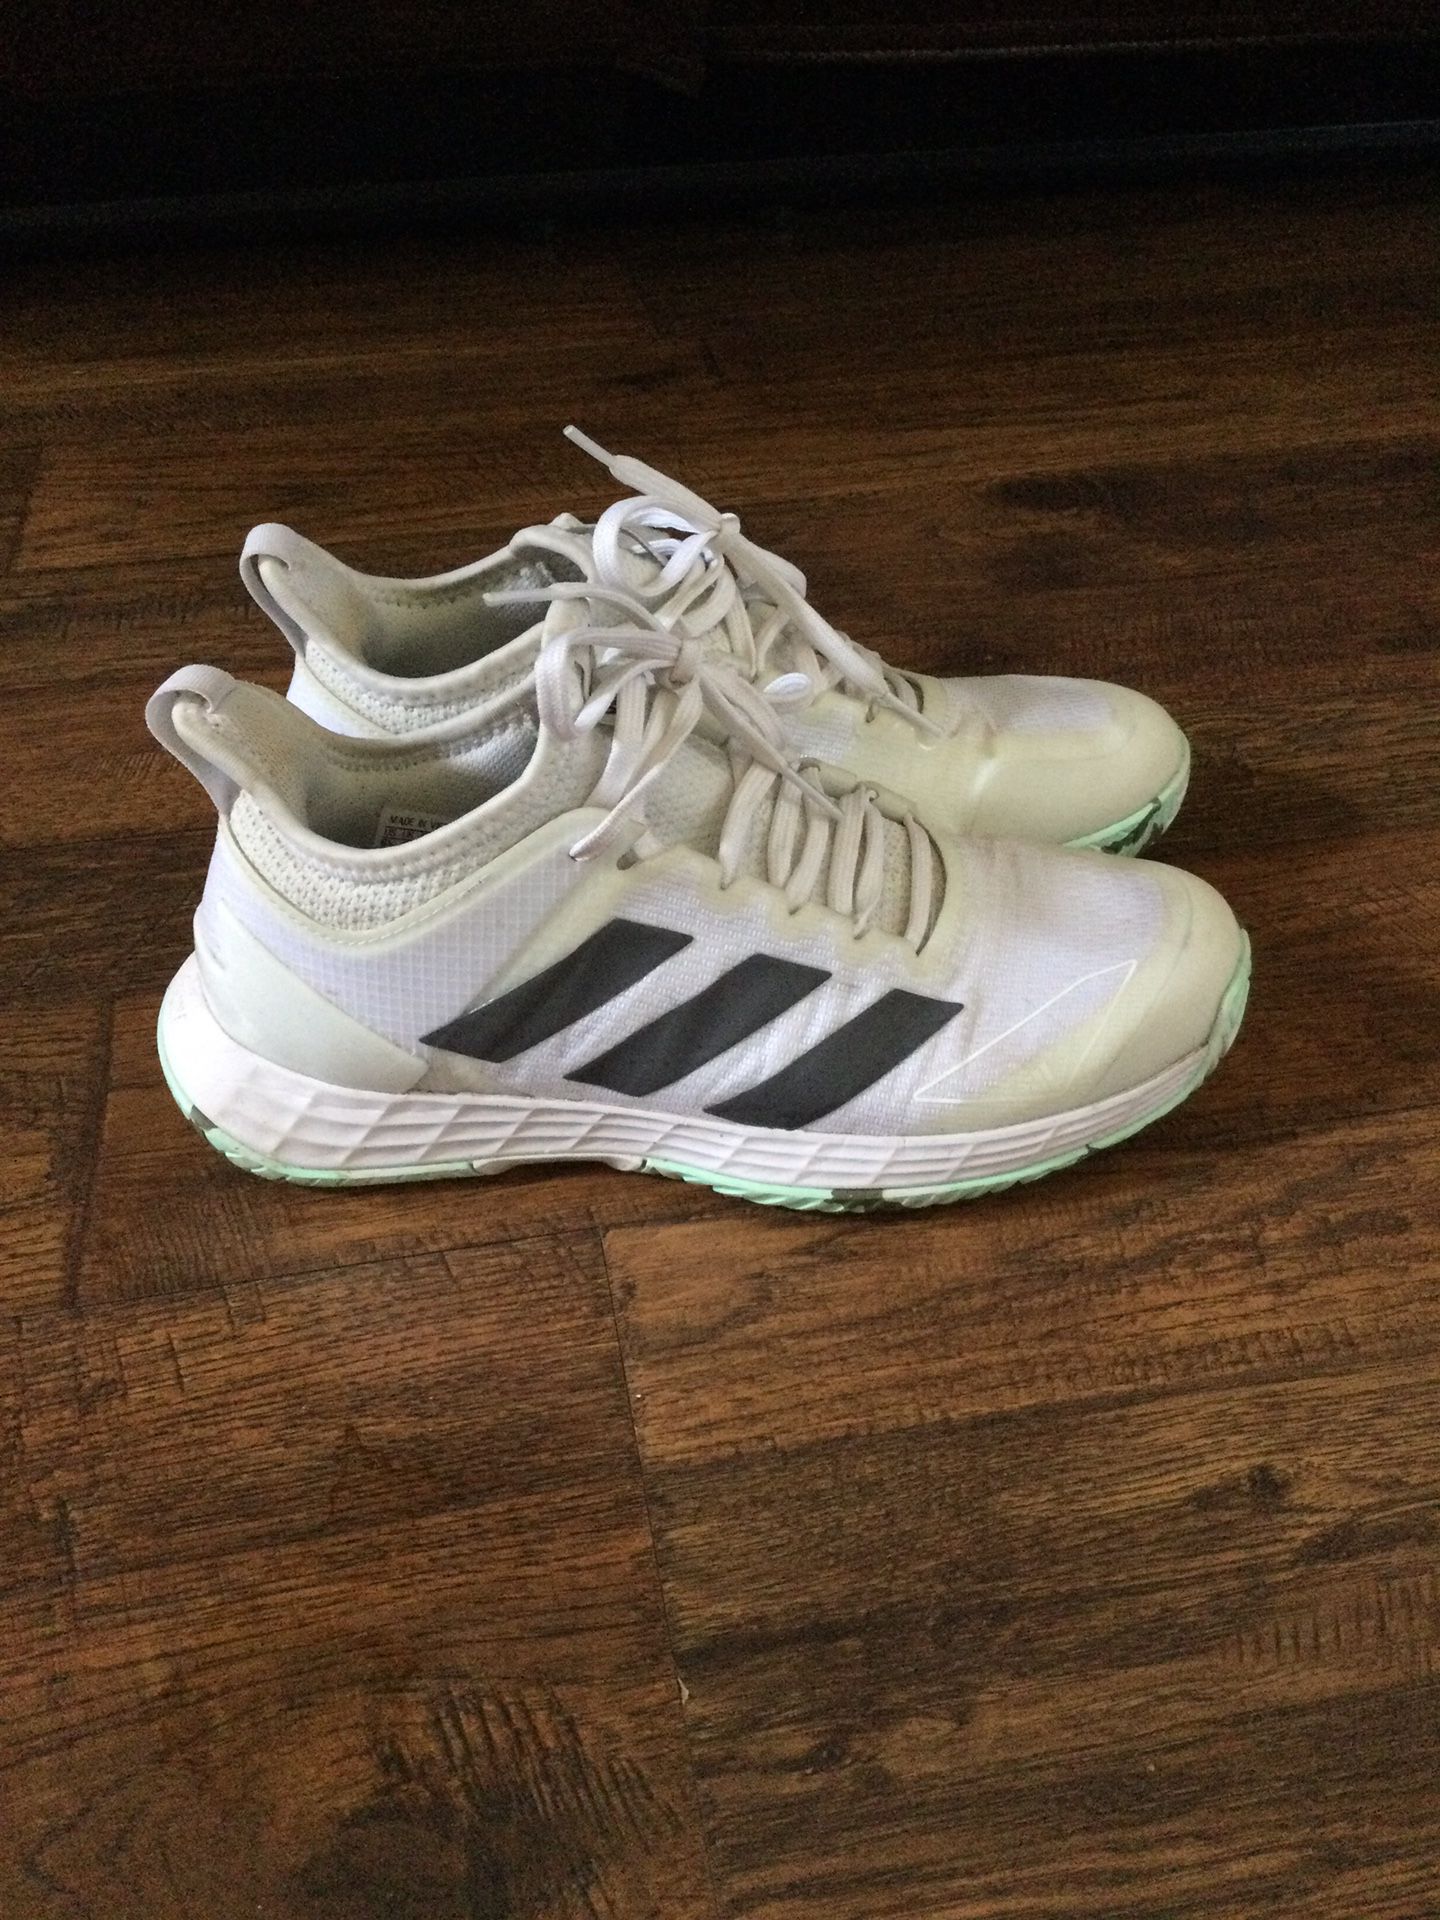 Adidas athletic shoes for women  size 6.5